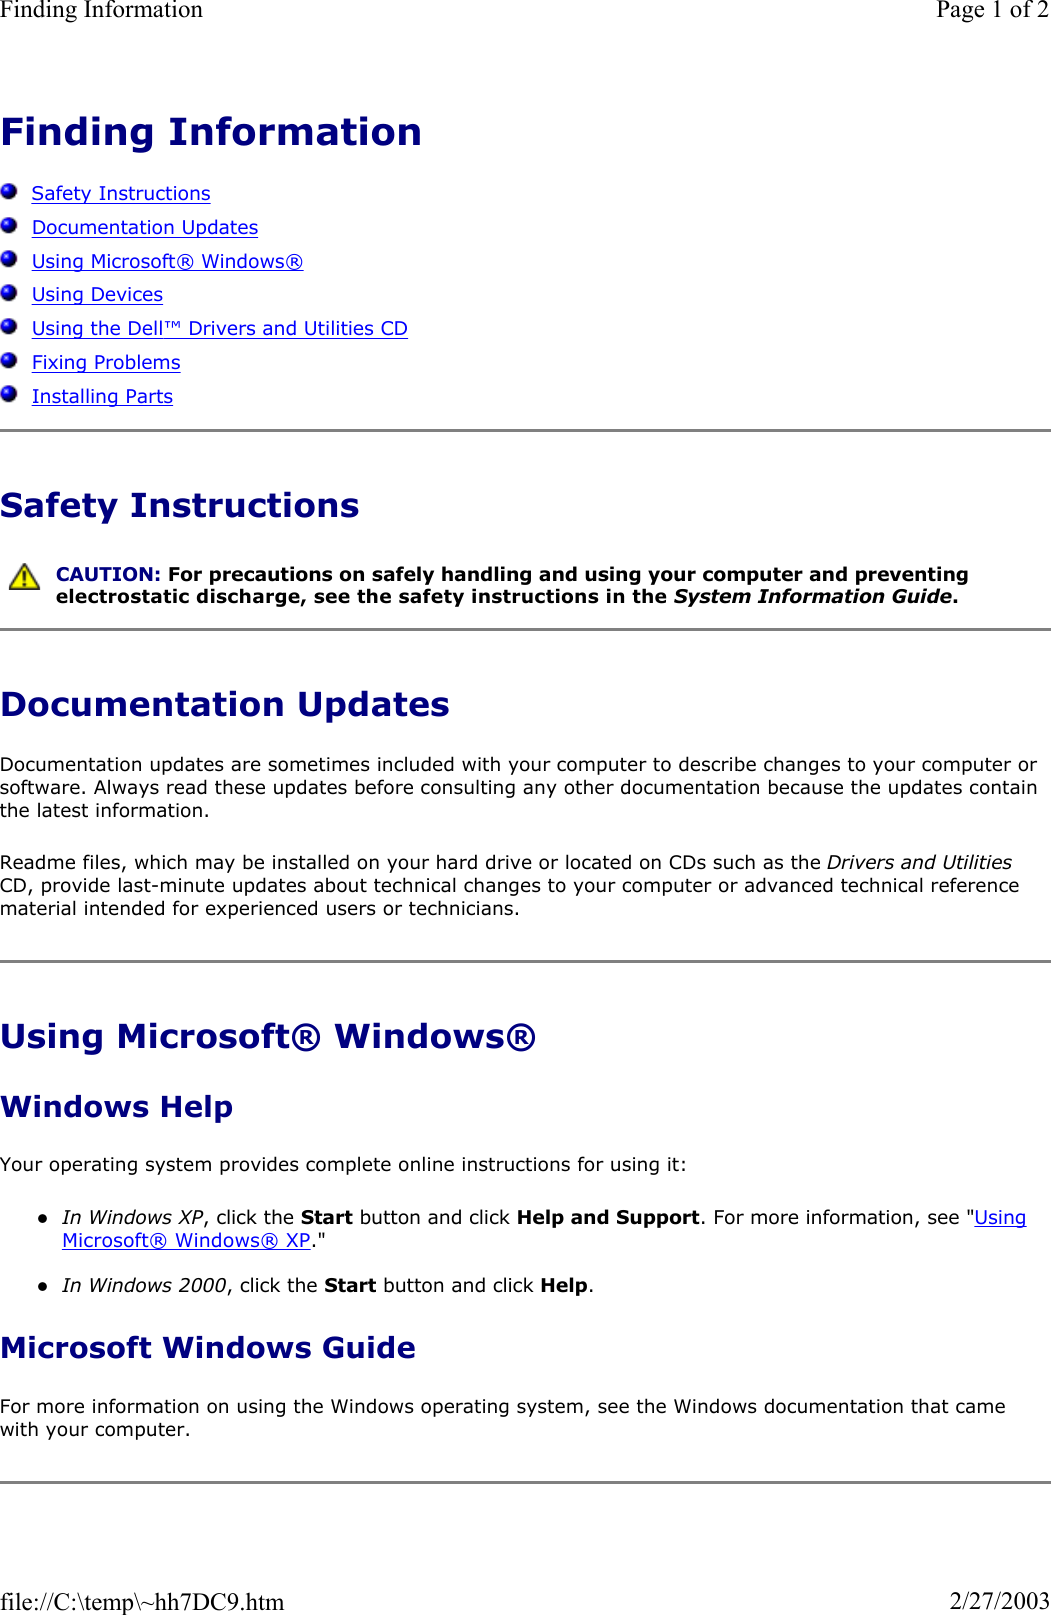 Finding InformationSafety InstructionsDocumentation UpdatesUsing Microsoft®Windows®Using DevicesUsing the Dell™Drivers and Utilities CDFixing ProblemsInstalling PartsSafety Instructions Documentation Updates Documentation updates are sometimes included with your computer to describe changes to your computer or software. Always read these updates before consulting any other documentation because the updates contain the latest information. Readme files, which may be installed on your hard drive or located on CDs such as the Drivers and Utilities CD, provide last-minute updates about technical changes to your computer or advanced technical reference material intended for experienced users or technicians. Using Microsoft® Windows® Windows Help Your operating system provides complete online instructions for using it: zIn Windows XP, click the Start button and click Help and Support. For more information, see &quot;Using Microsoft®Windows®XP.&quot; zIn Windows 2000, click the Start button and click Help.Microsoft Windows Guide For more information on using the Windows operating system, see the Windows documentation that came with your computer. CAUTION: For precautions on safely handling and using your computer and preventing electrostatic discharge, see the safety instructions in the System Information Guide.Page 1 of 2Finding Information2/27/2003file://C:\temp\~hh7DC9.htm